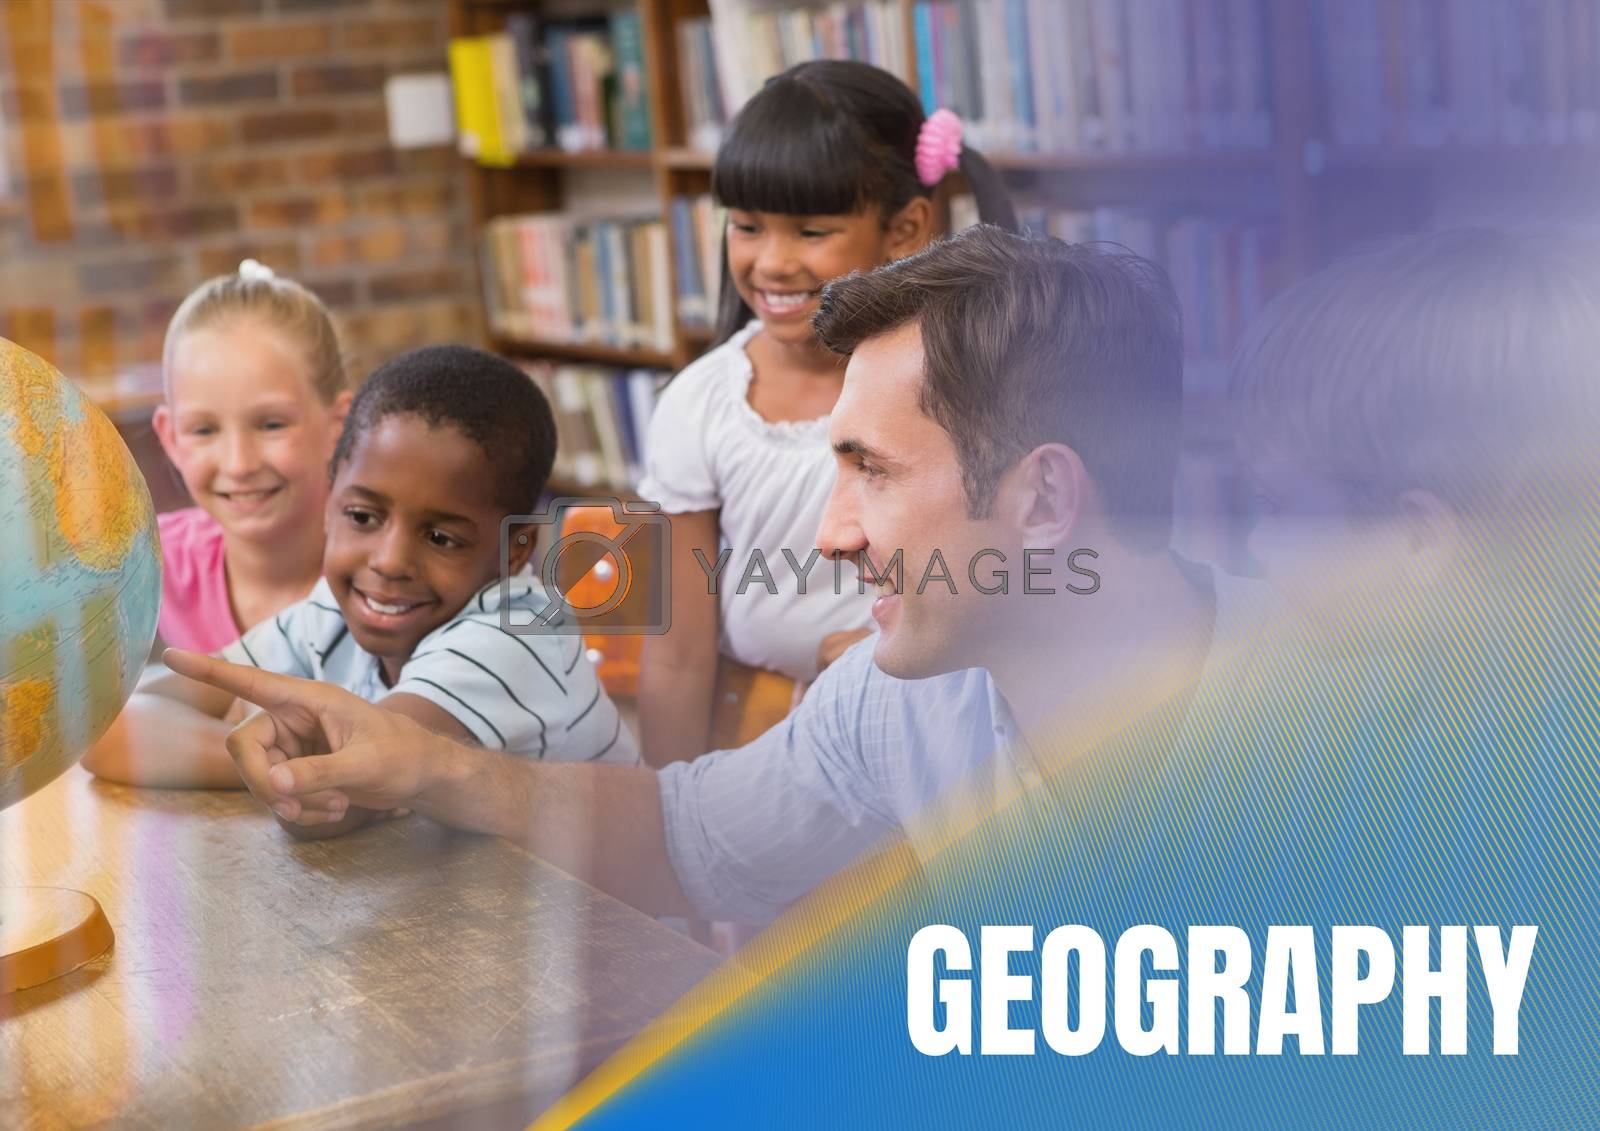 Royalty free image of Geography text and Elementary school teacher with class by Wavebreakmedia